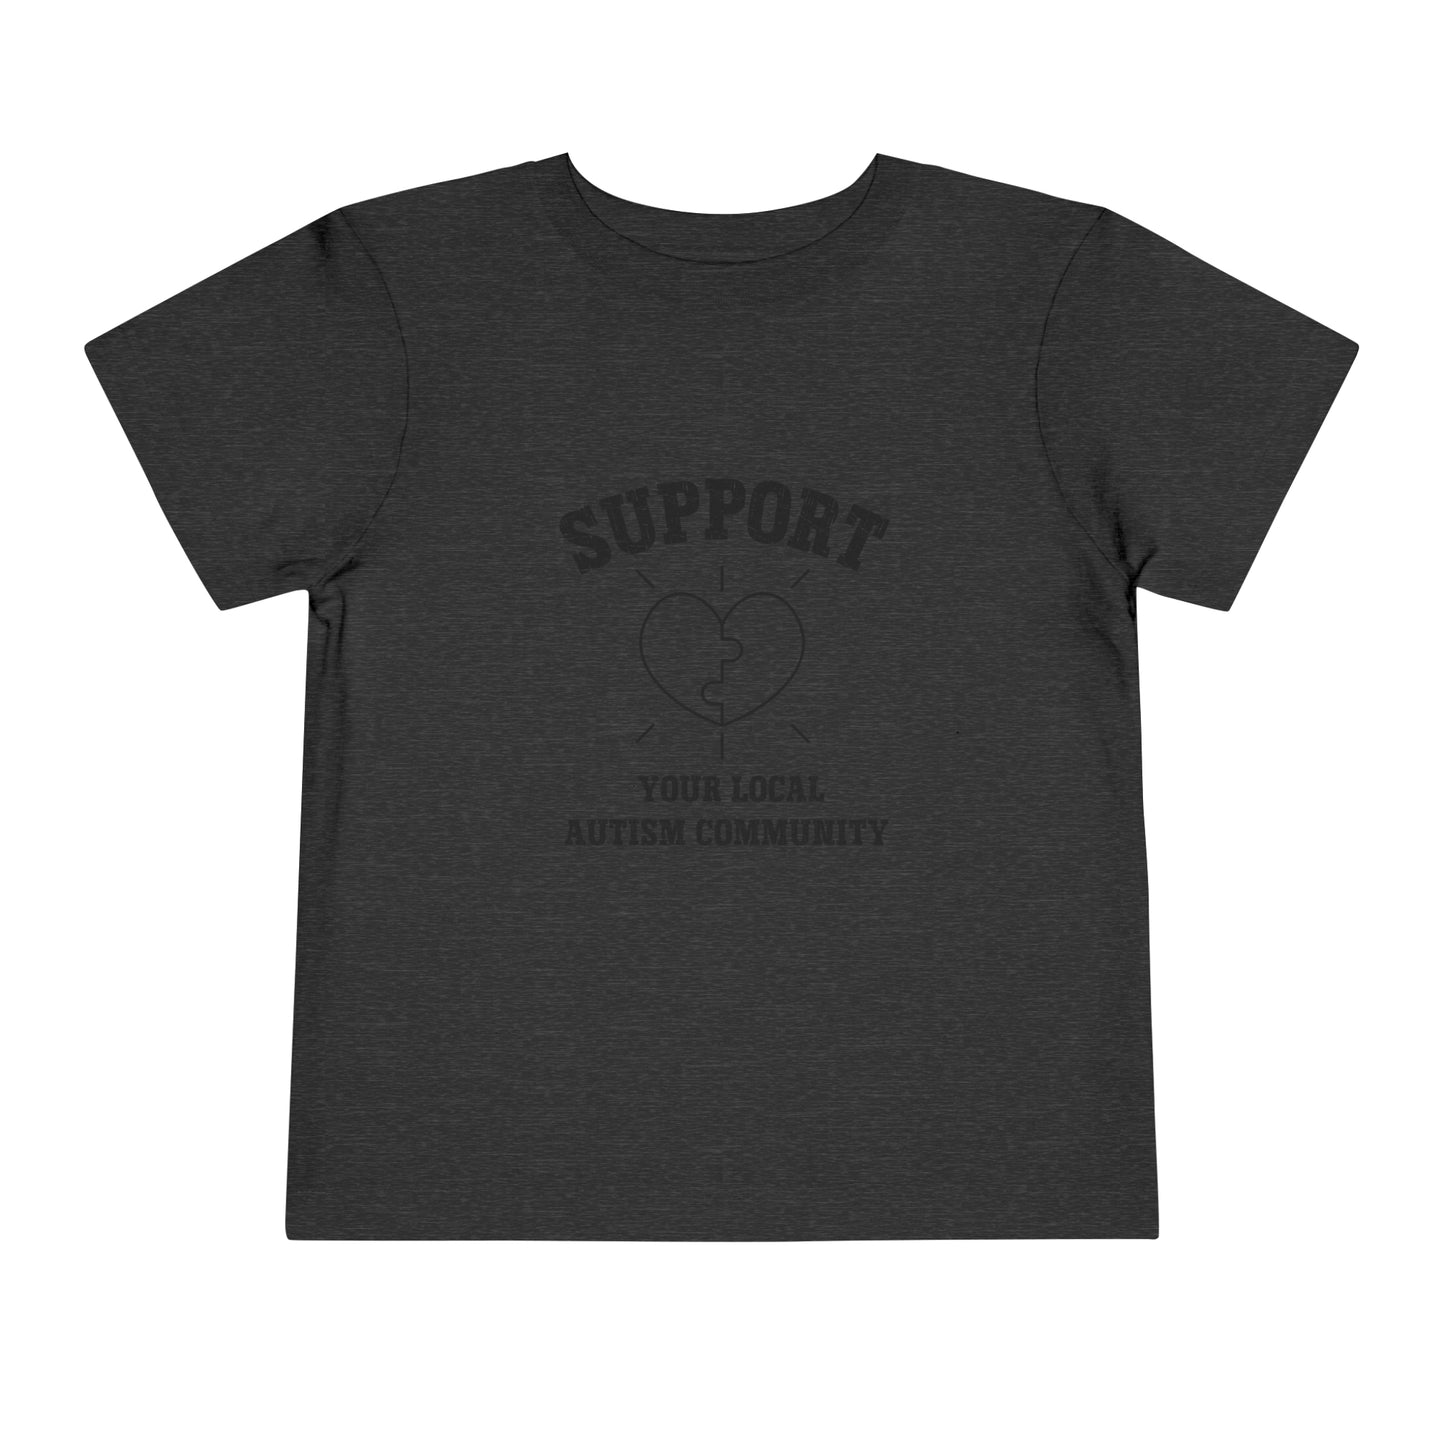 Support Your Local Autism Community  Autism Toddler Short Sleeve Tee